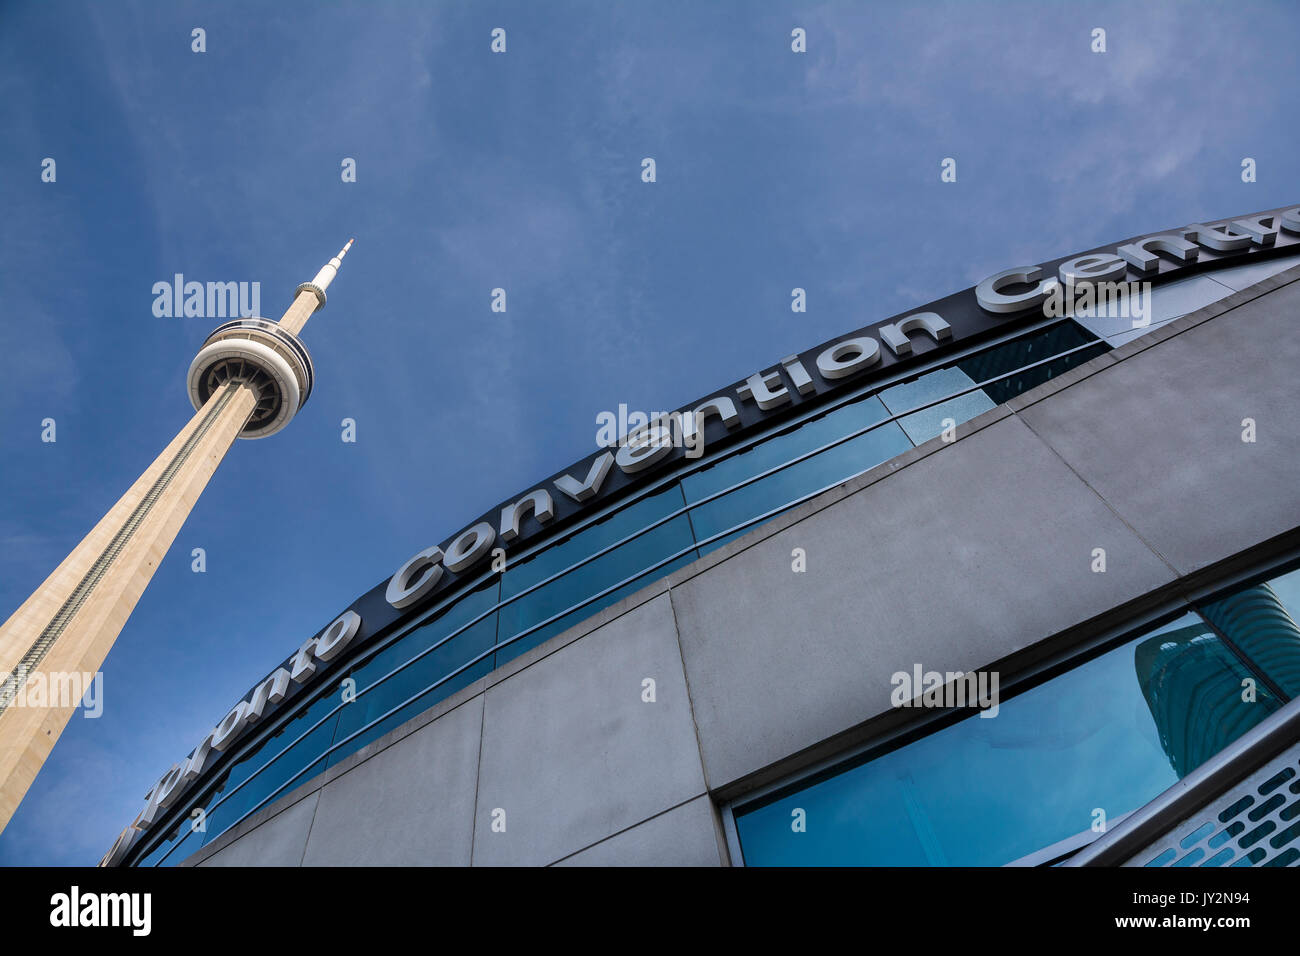 Toronto,Canada-august 2,2015:Suggestive view of the cn tower and the Toronto convention centre in downtown Toronto during a sunny day Stock Photo